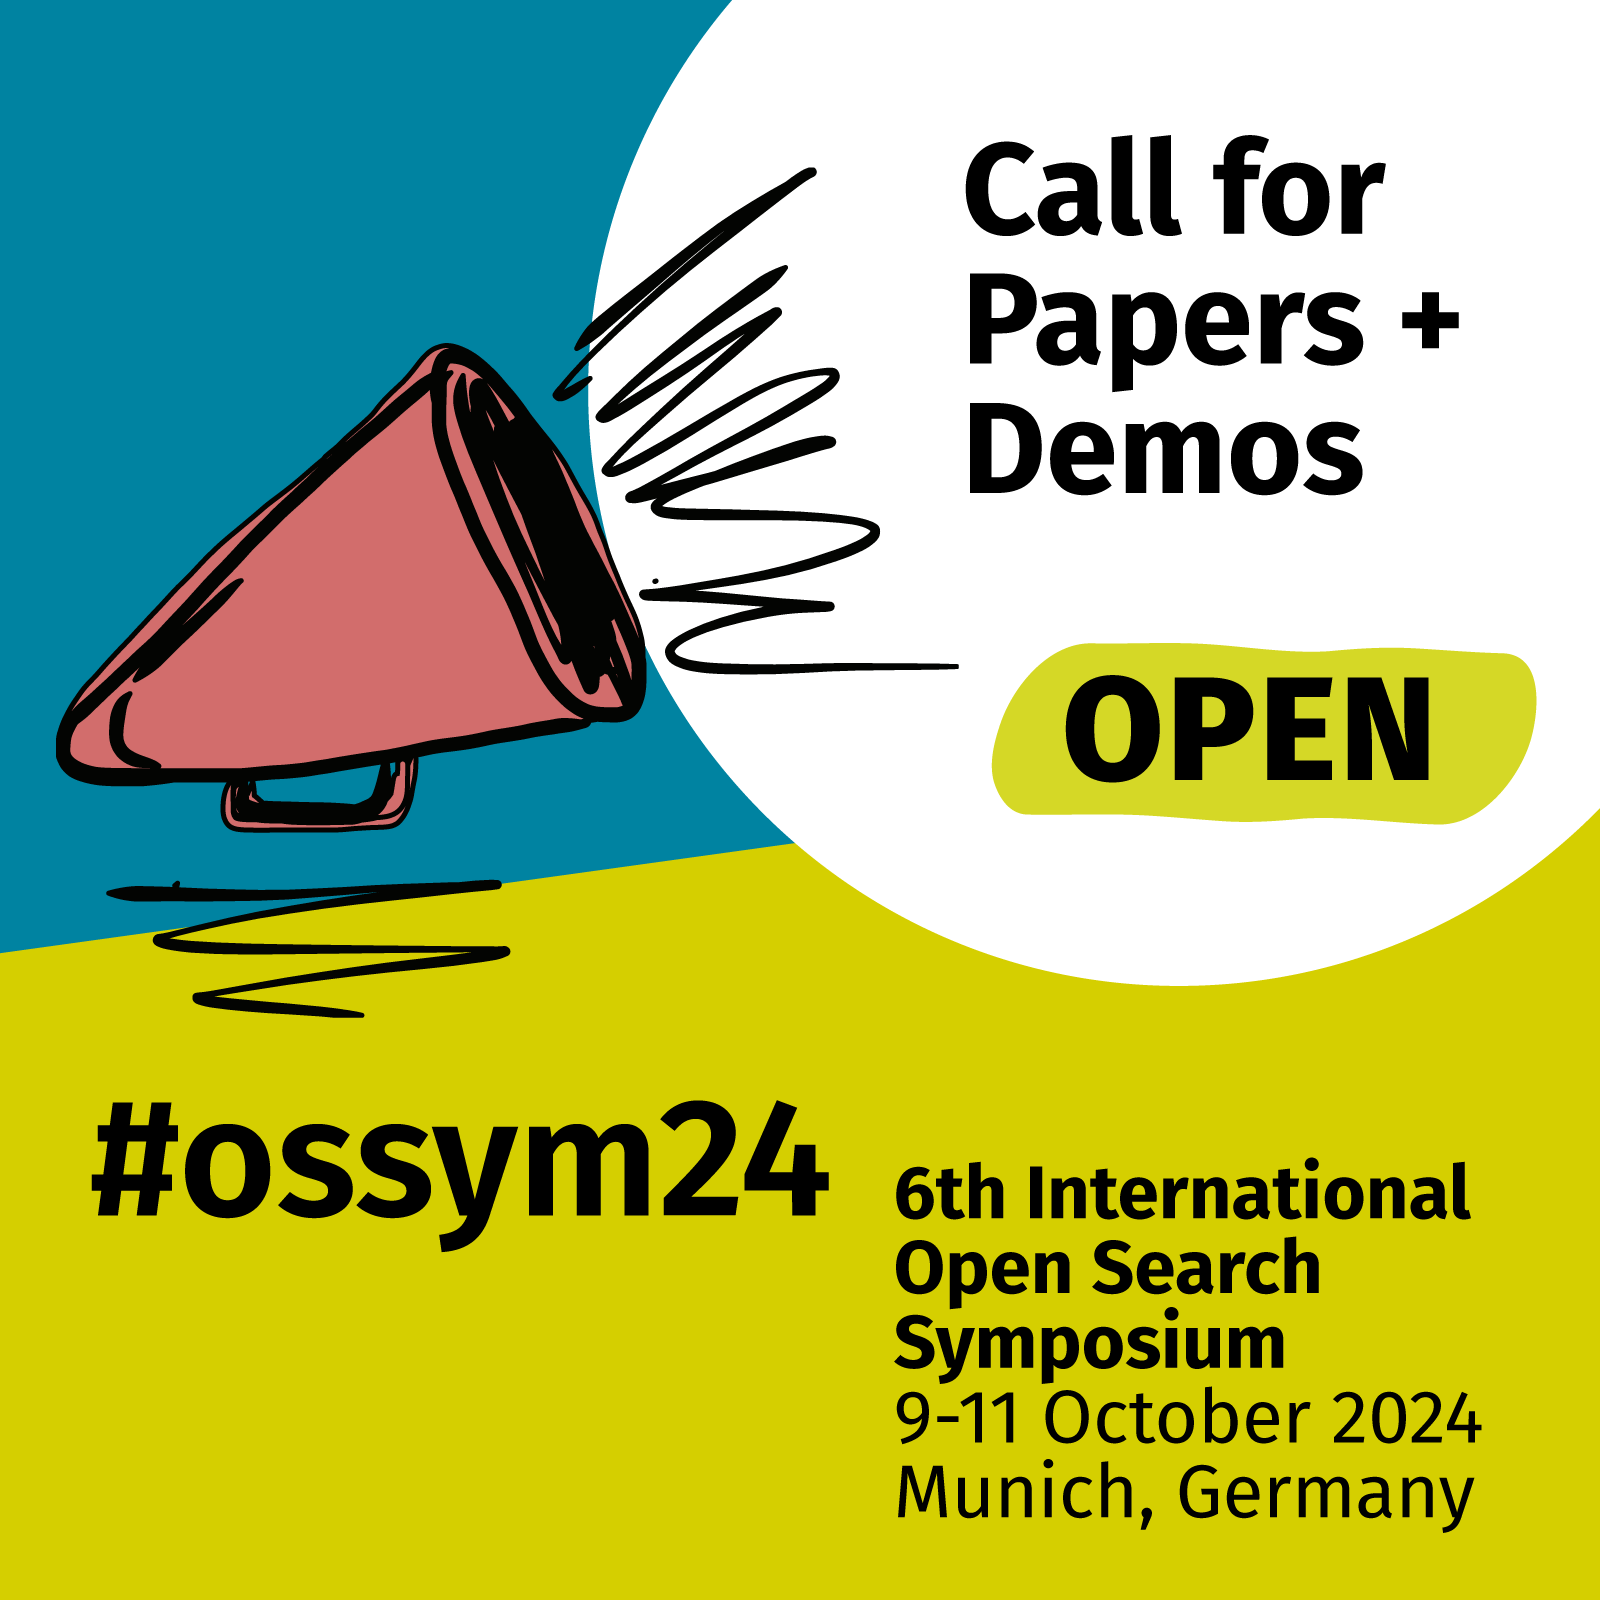 #ossym24 - Call for Papers and Demos keyvisual